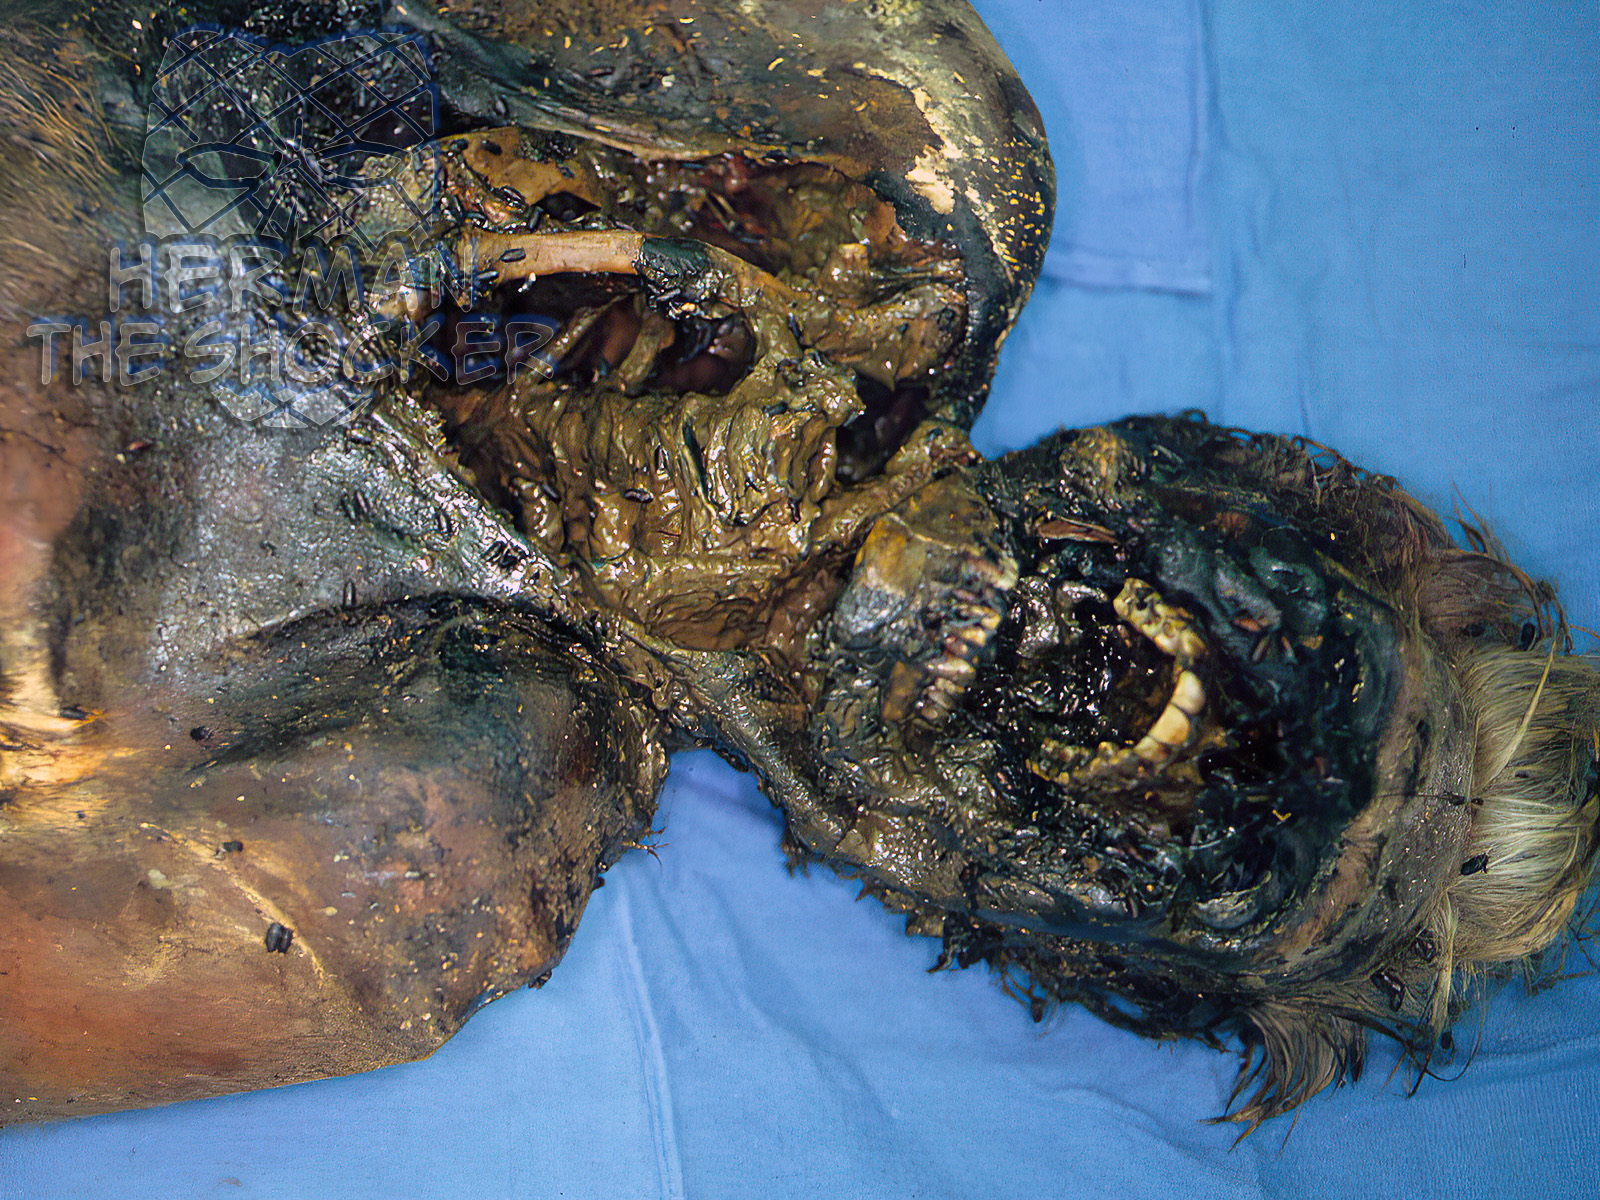 Badly decomposed bodies are typically not visually identifiable